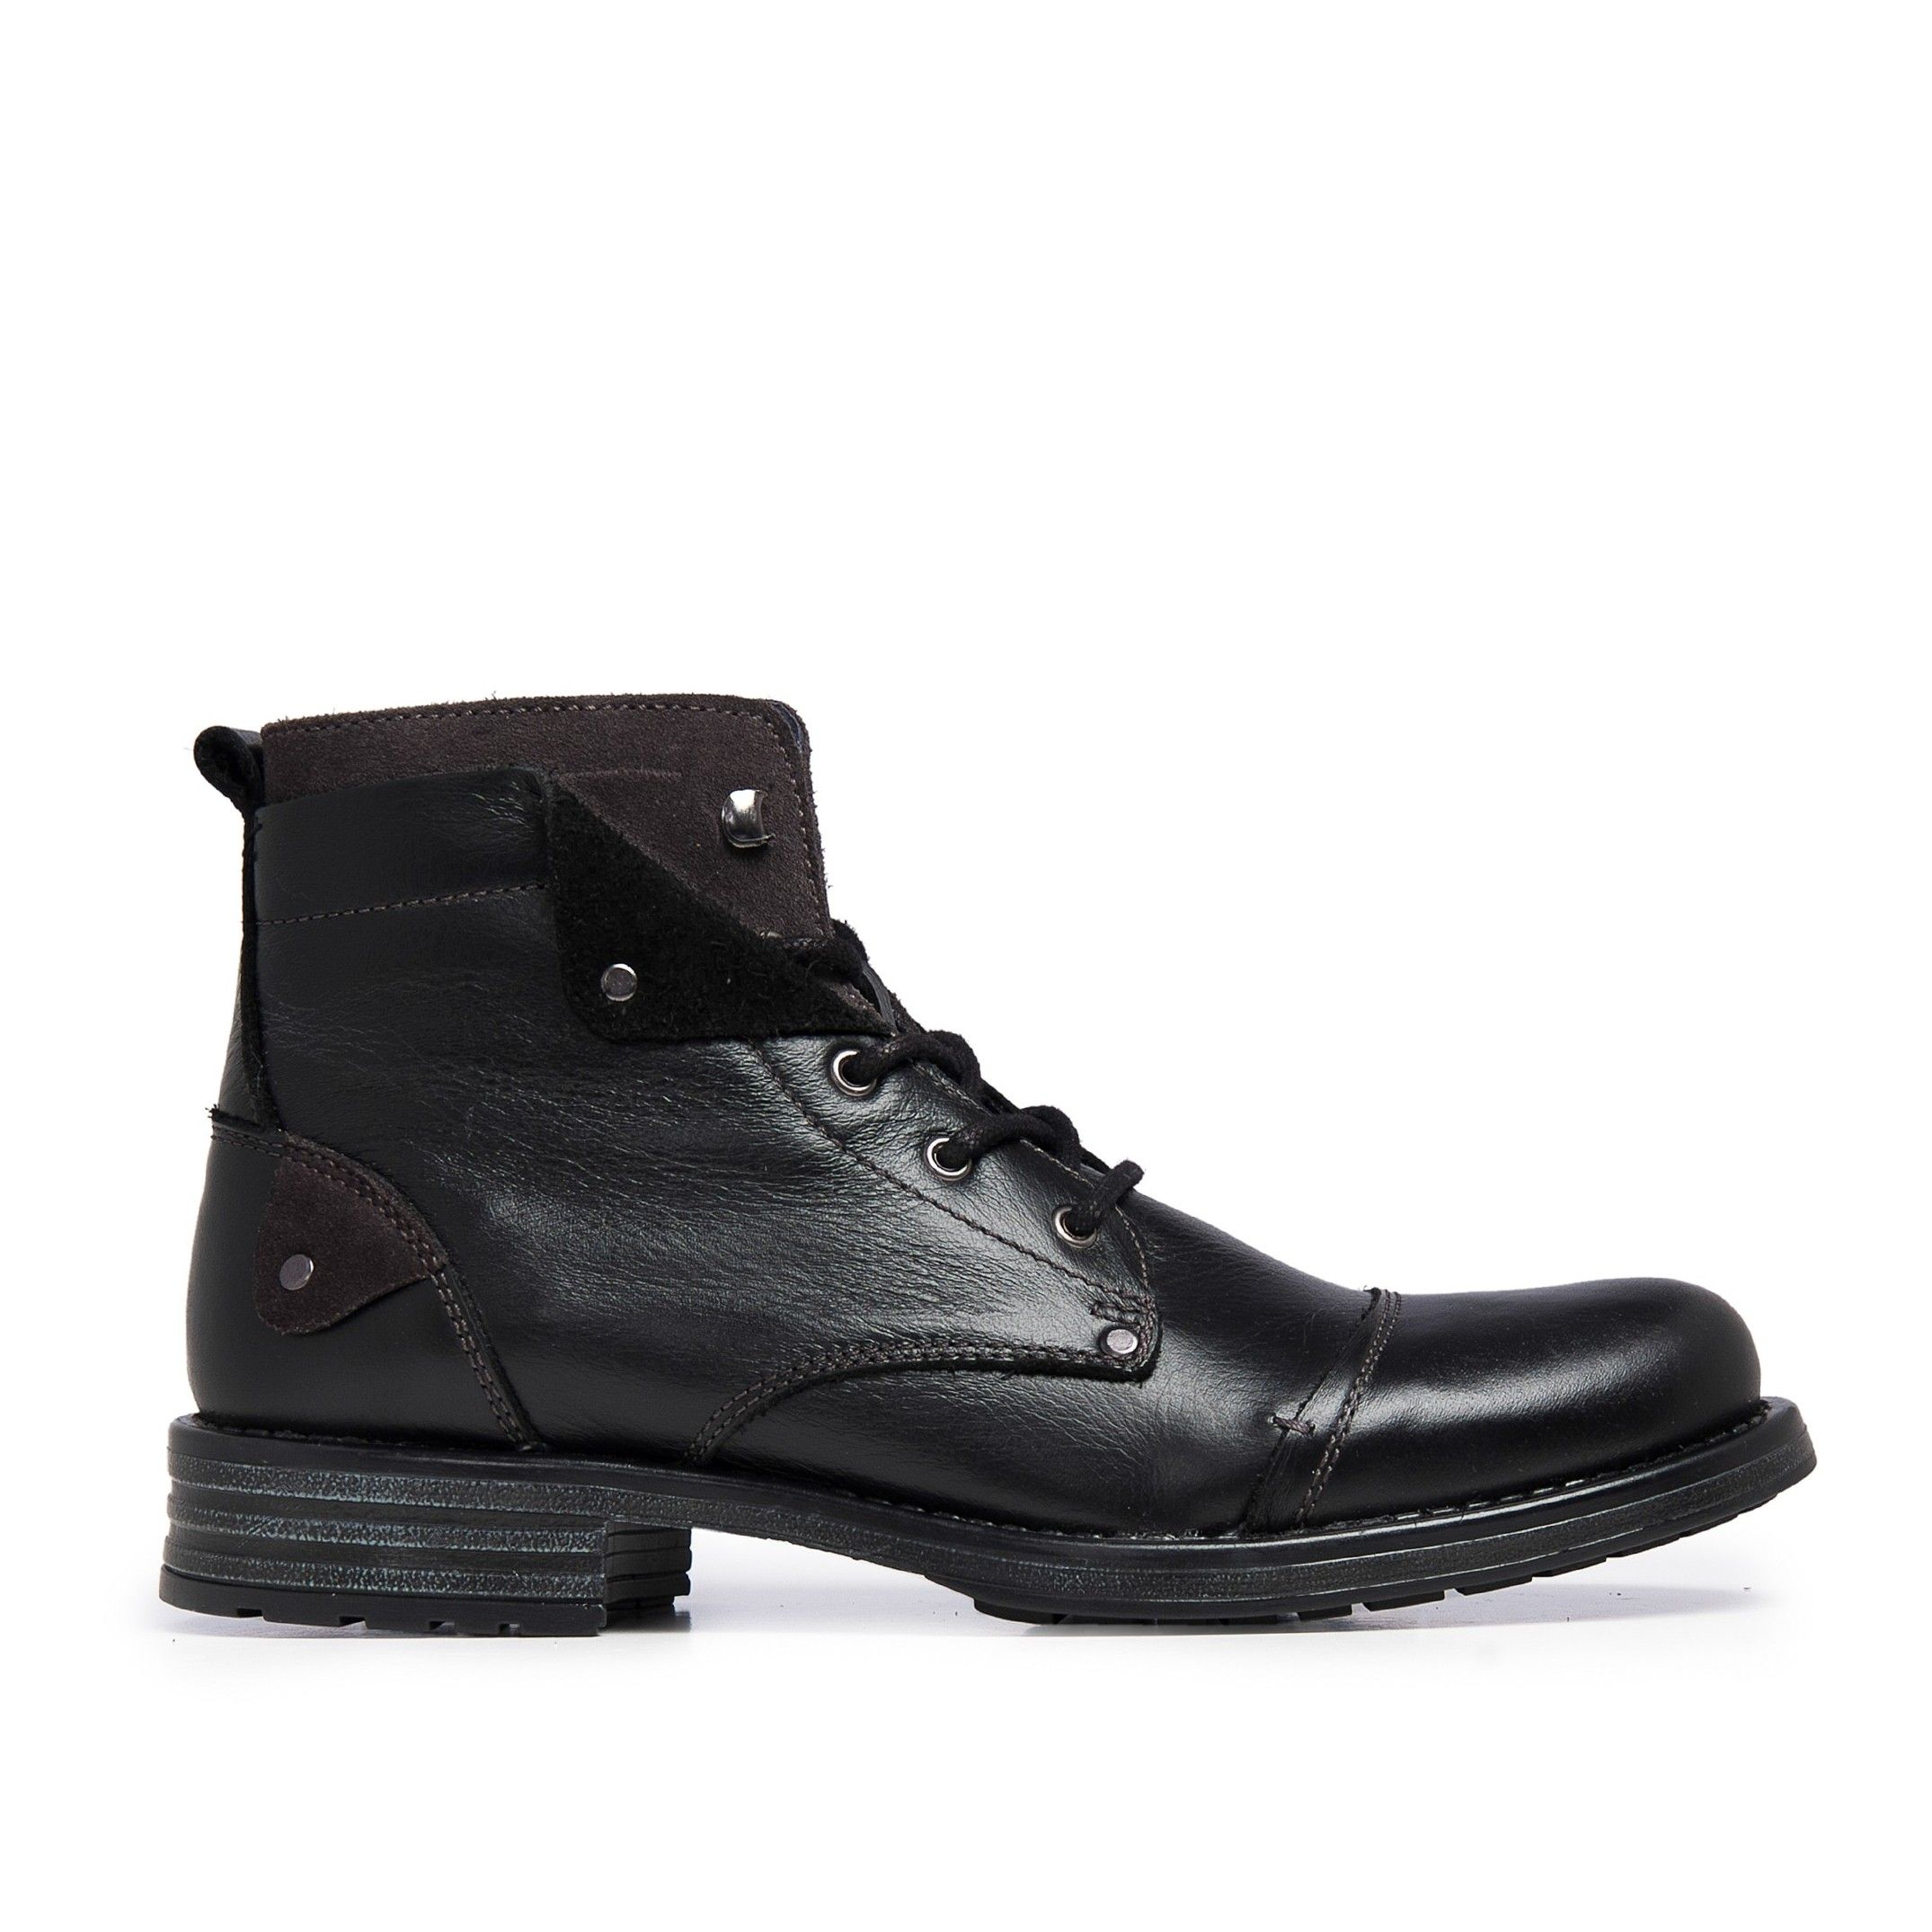 Leather boots for men with casual style. Laces closure. Upper and inner made of leather. Made in Portugal.